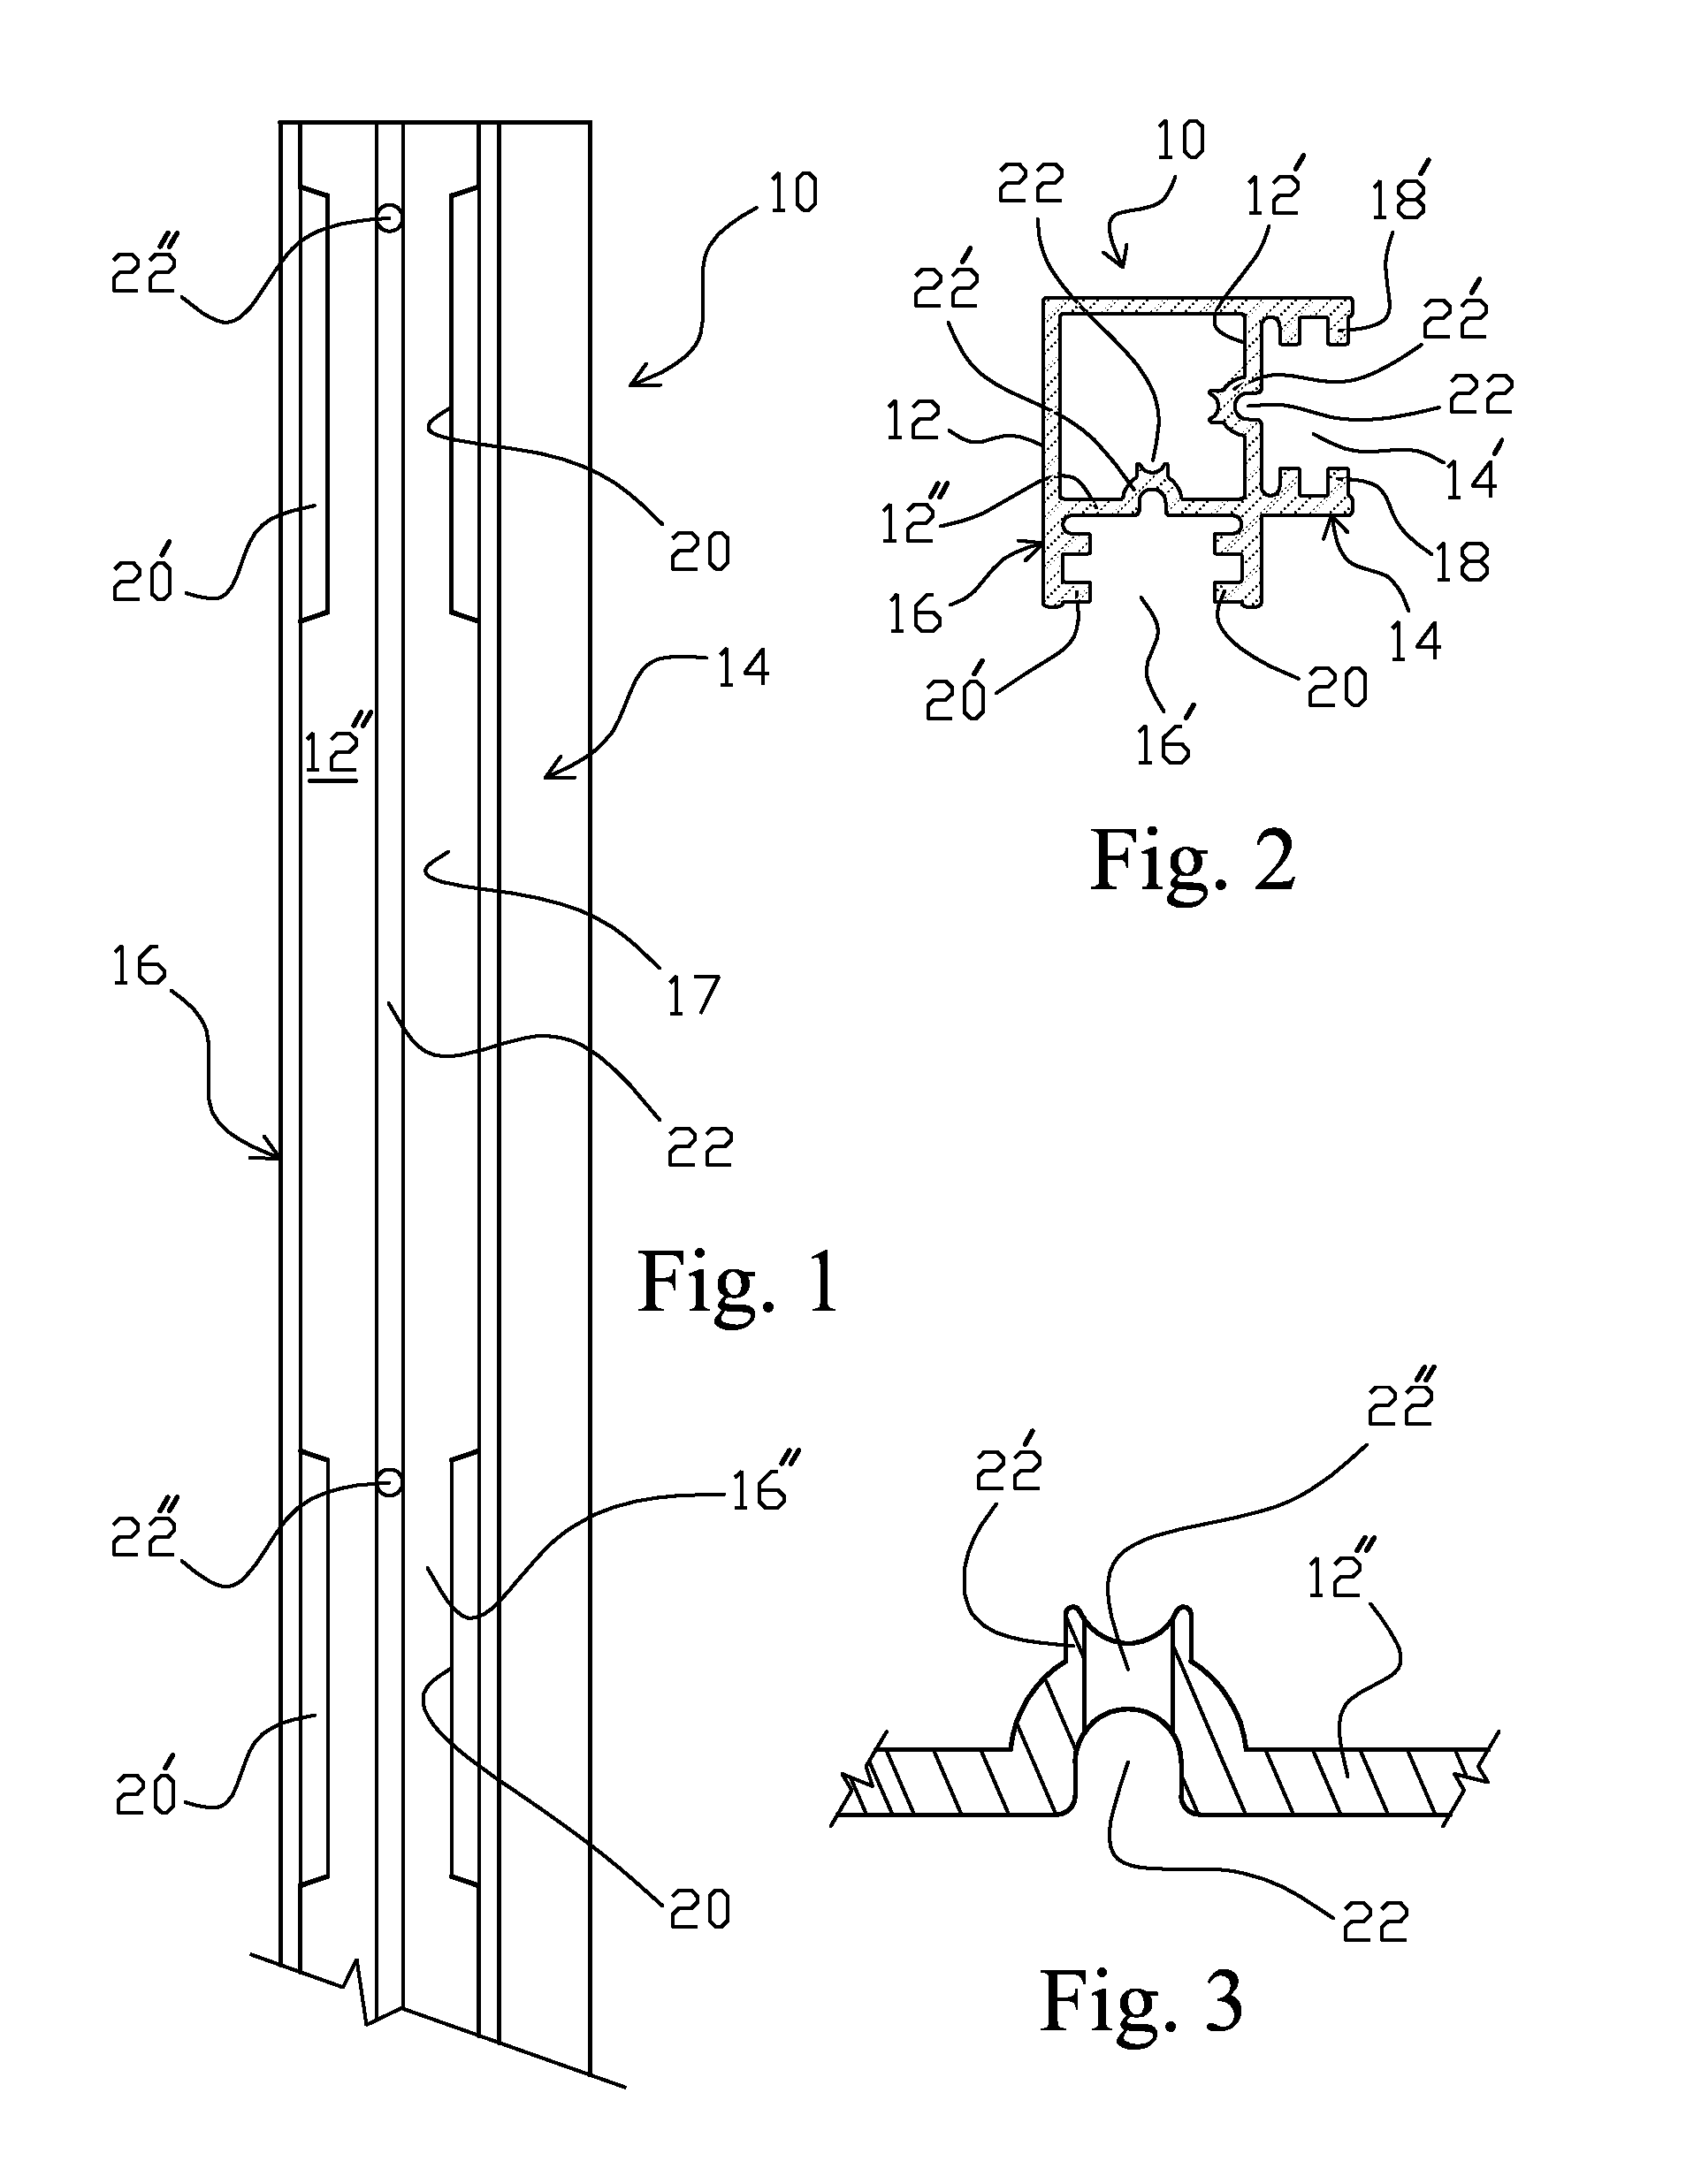 Frame system with releasable couplers